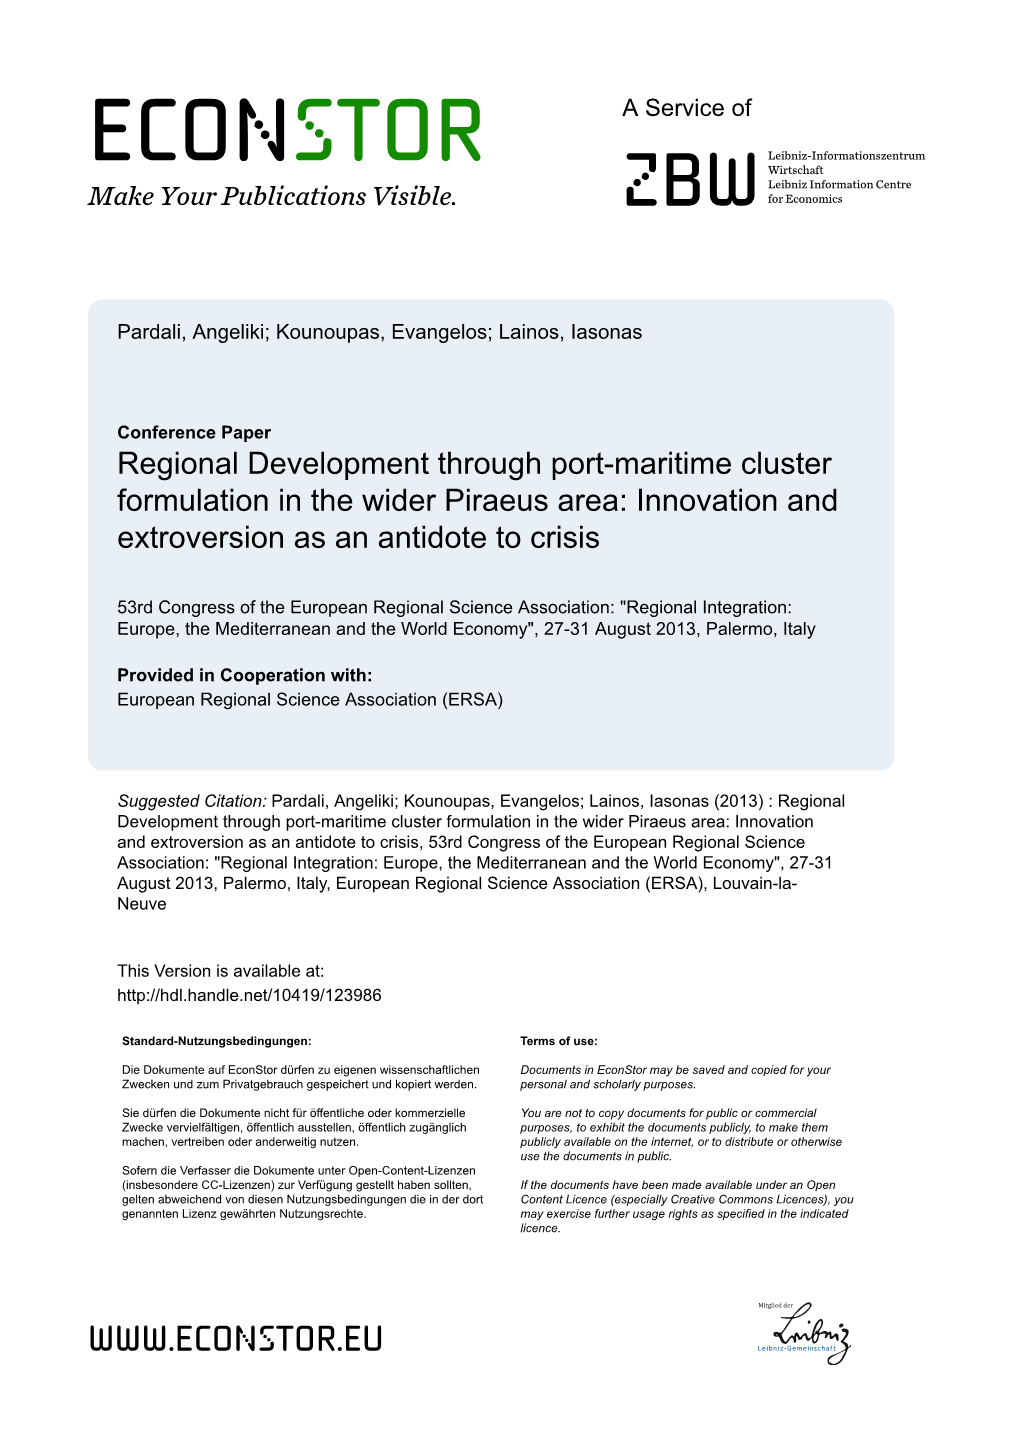 Regional Development Through Port-Maritime Cluster Formulation in the Wider Piraeus Area: Innovation and Extroversion As an Antidote to Crisis